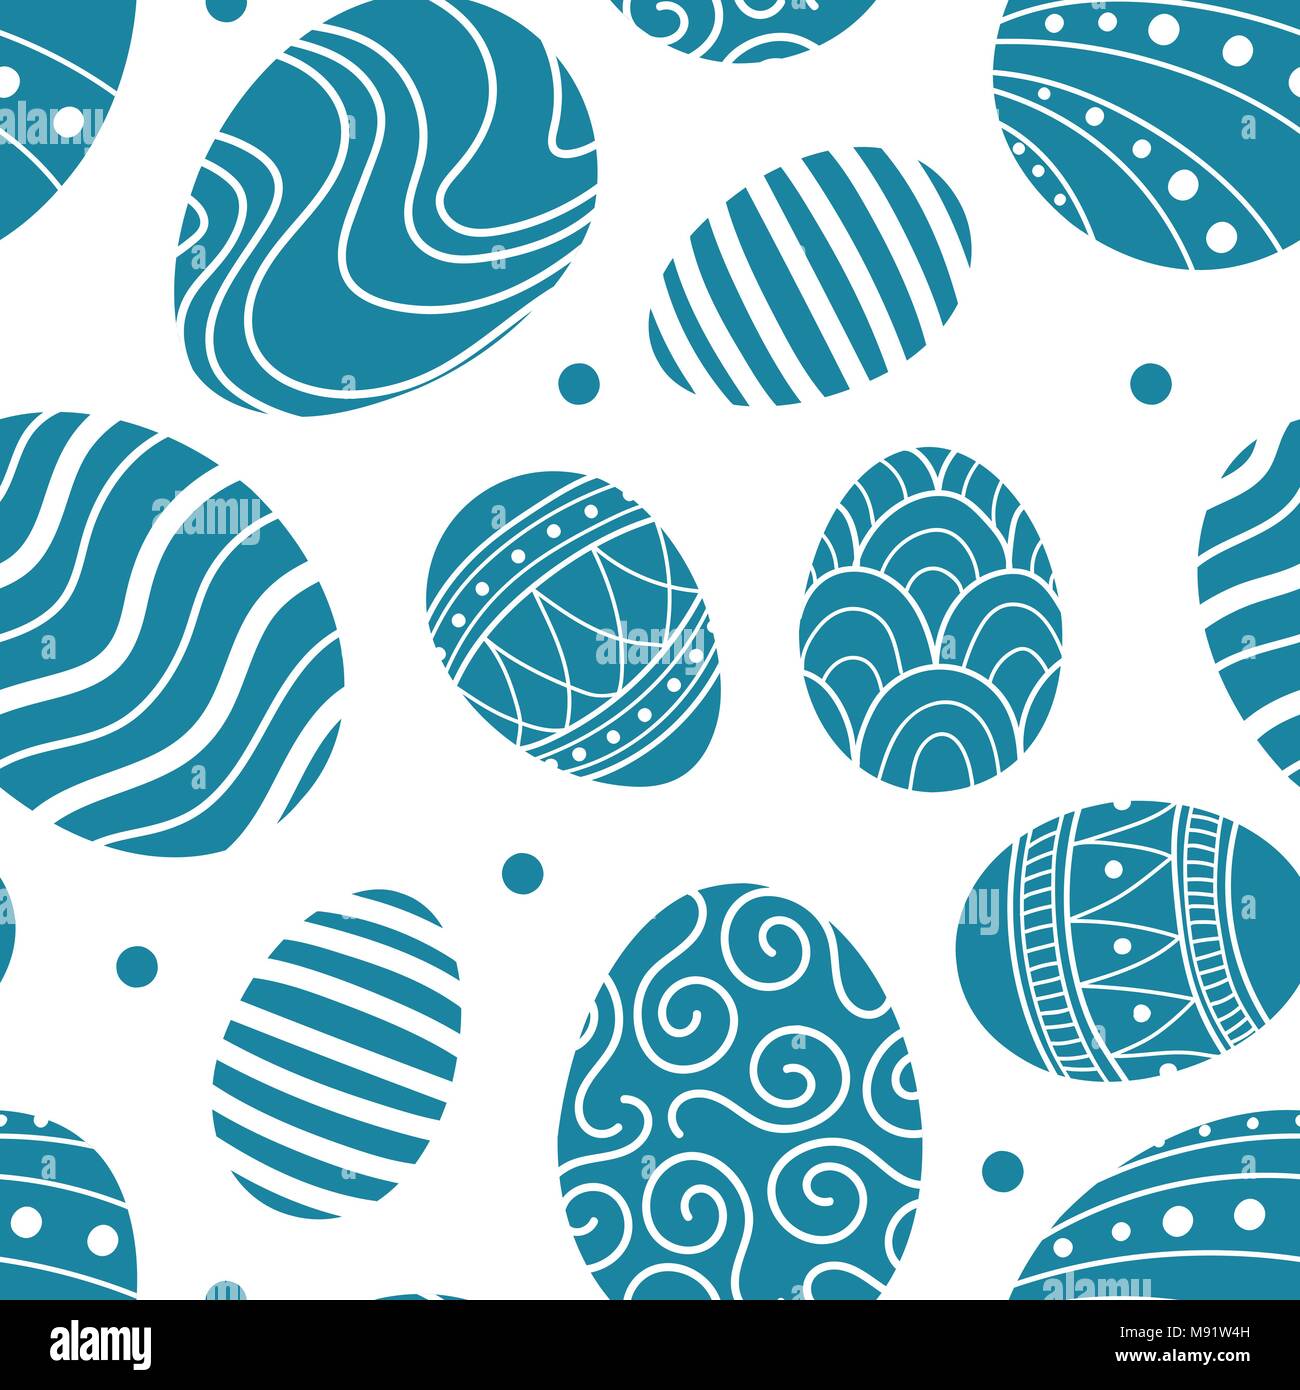 Easter eggs in blue silhouette and dots random on white background. Cute hand drawn seamless pattern design for Easter festival in vector illustration Stock Vector